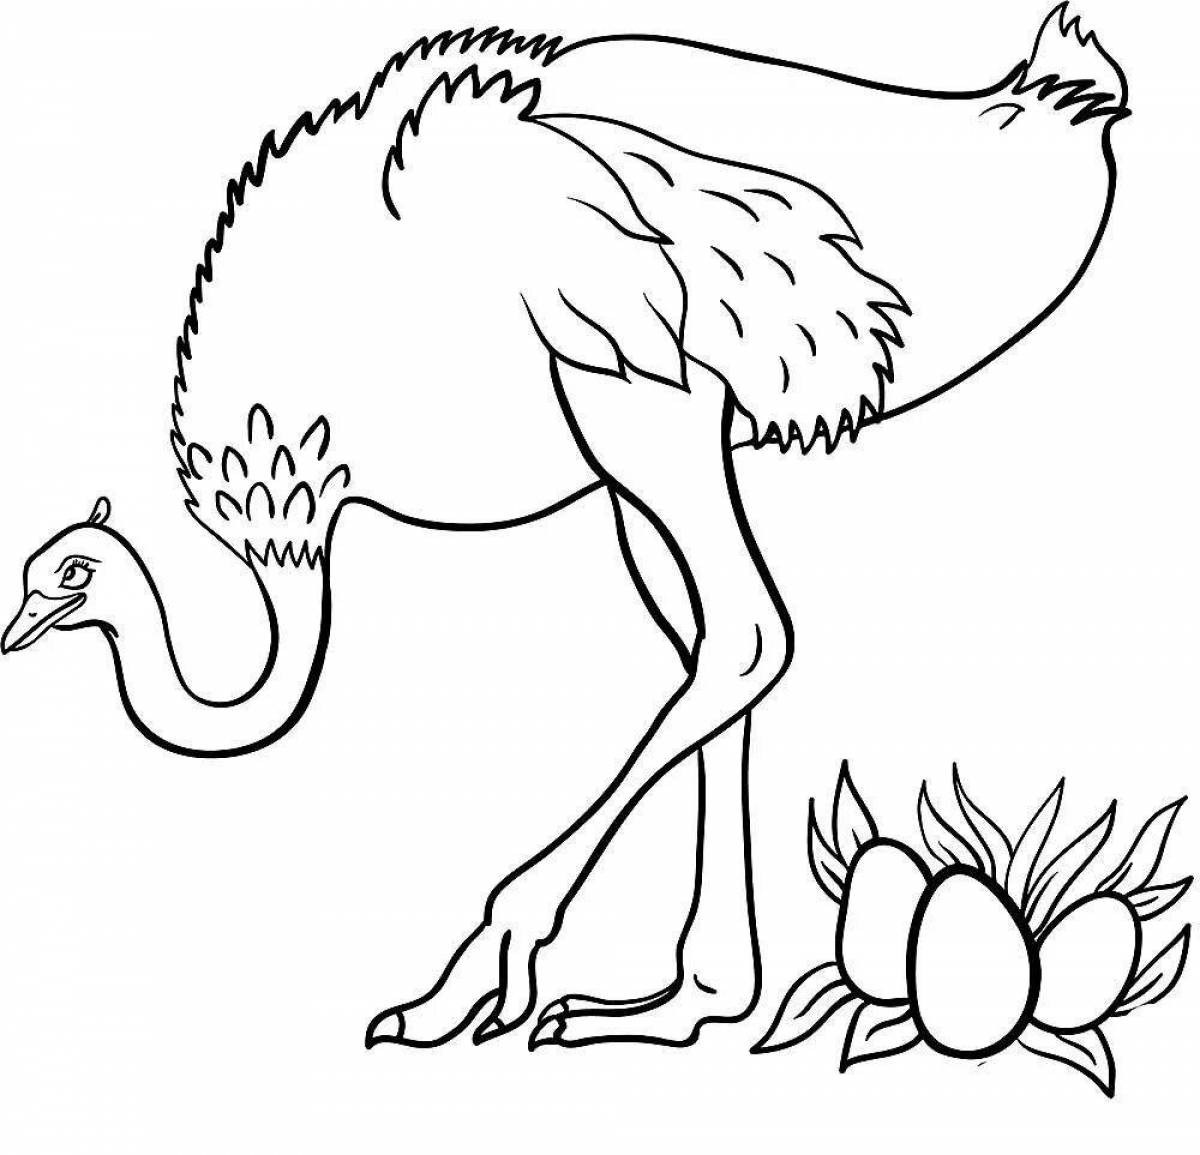 Colouring nice ostrich for kids